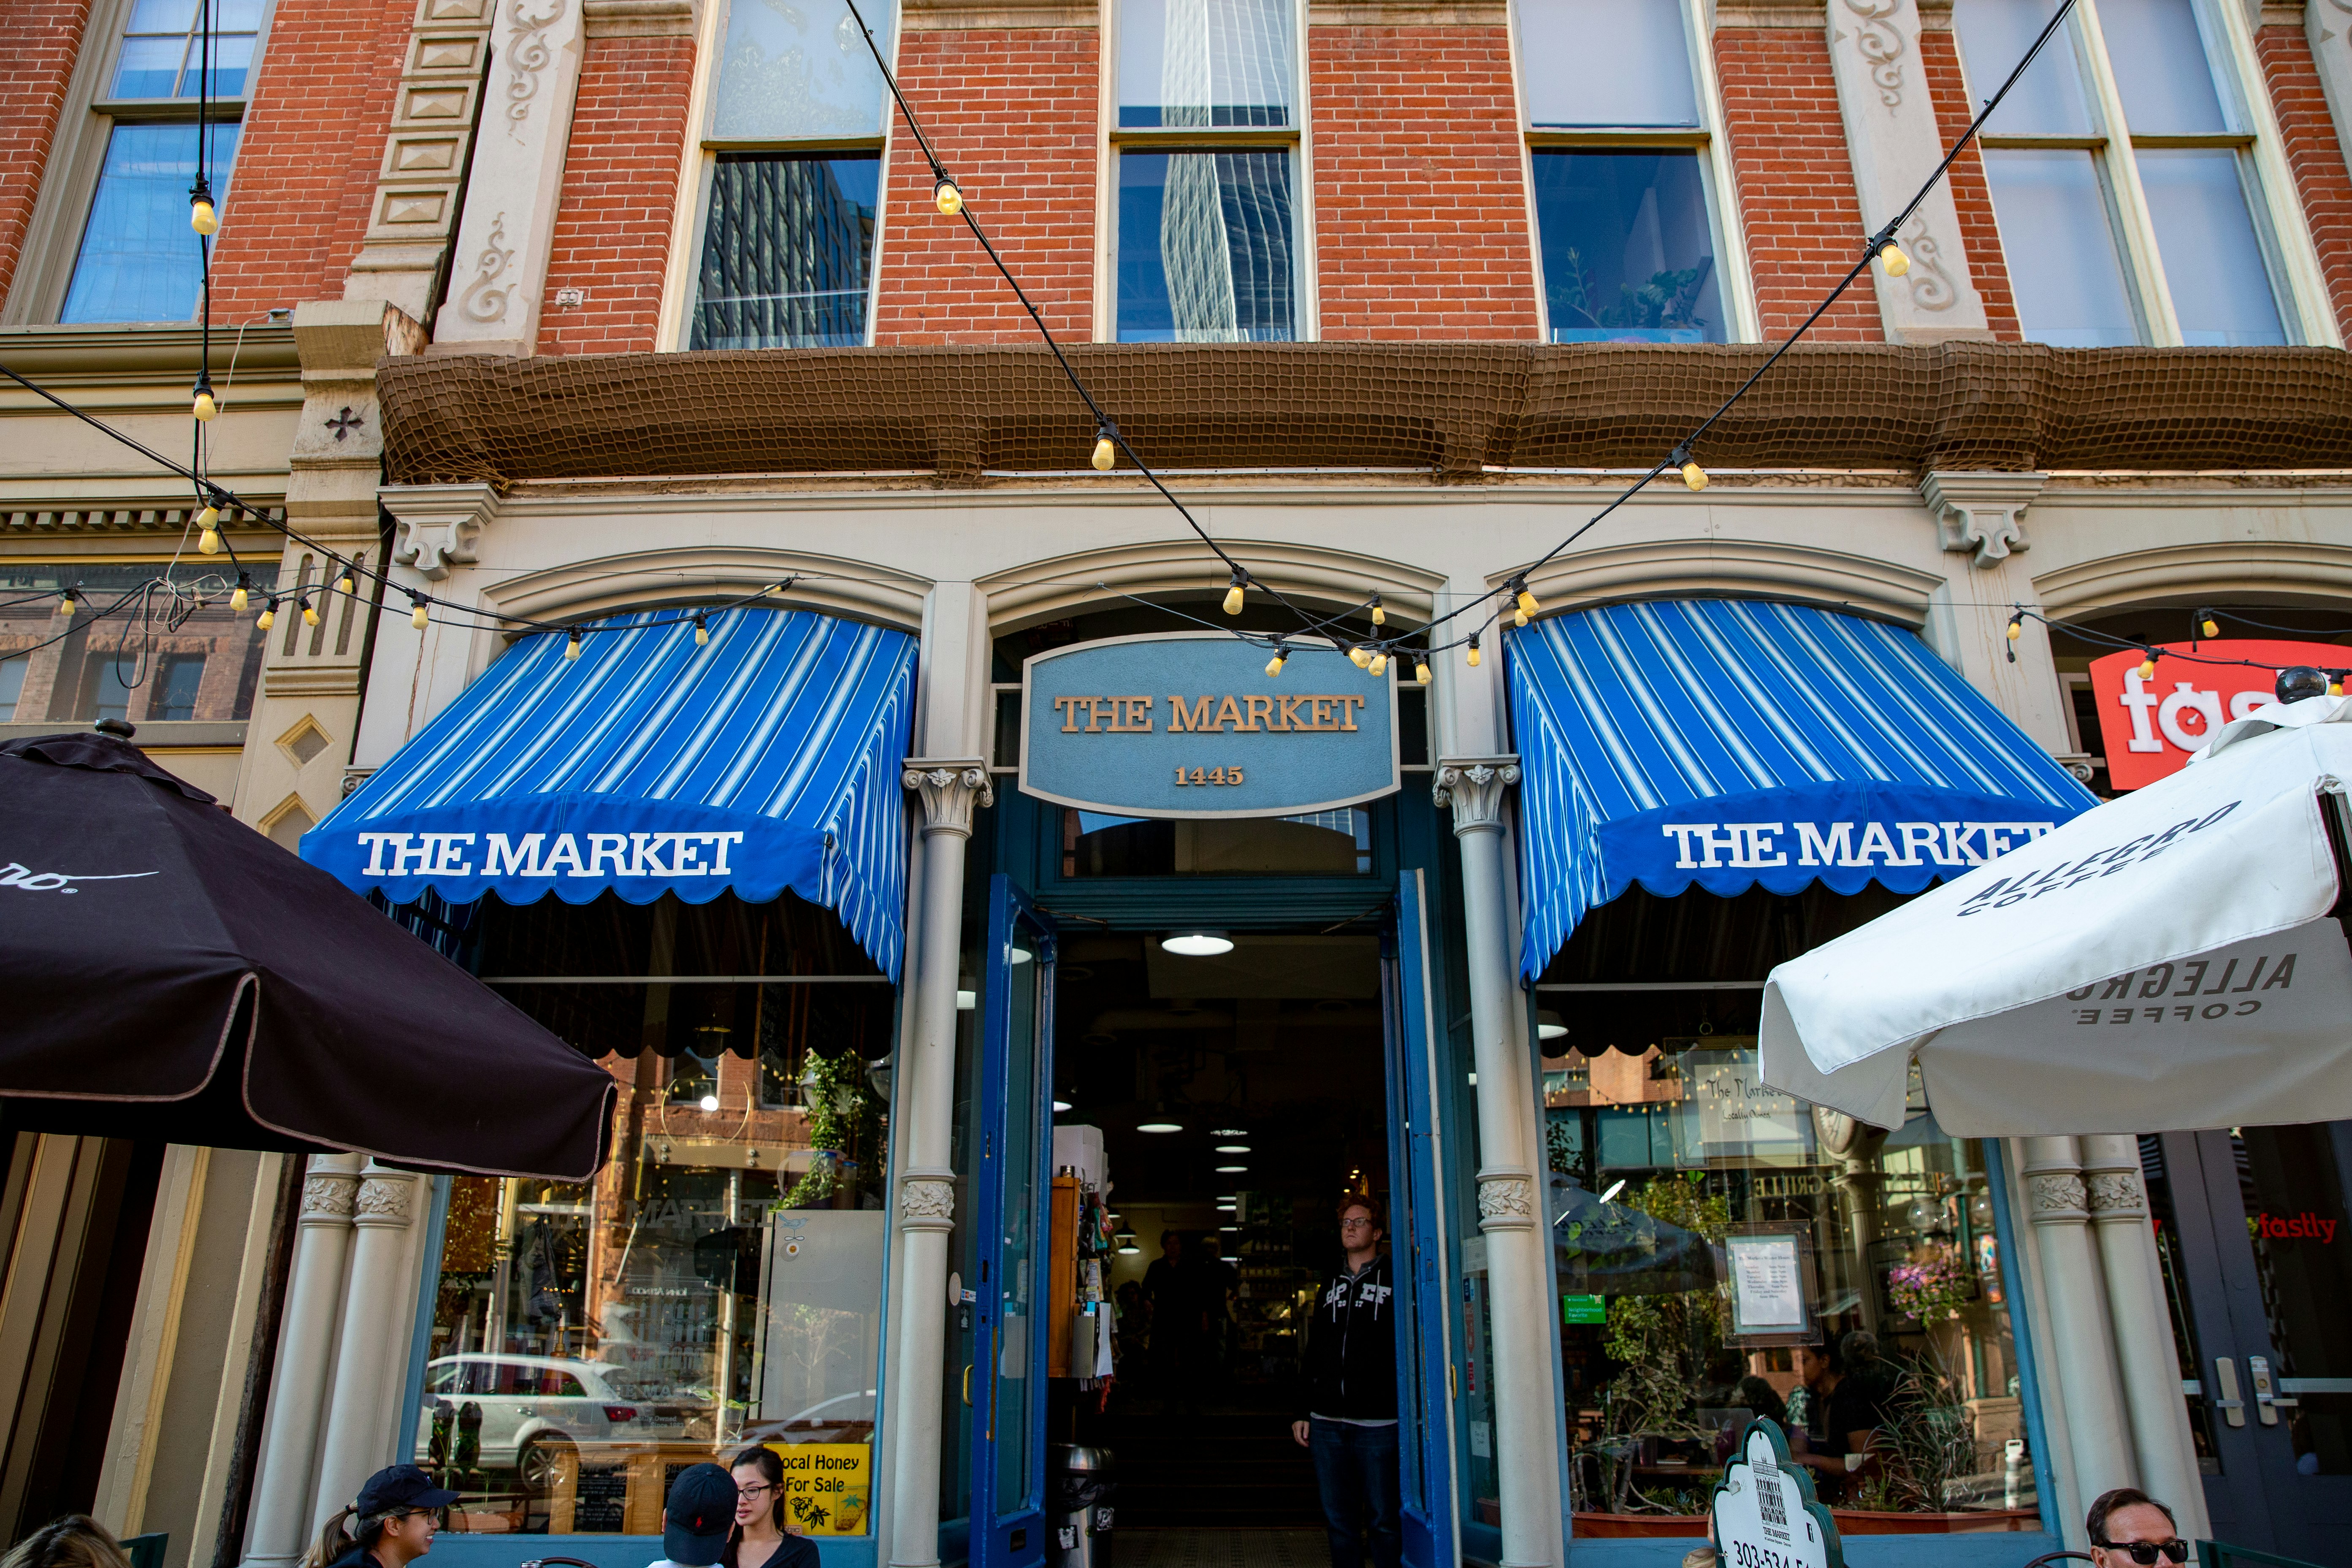 A Victorian brick facade with grey columns with Corinthian caps and blue awnings with white stripes, which say "The Market" in white letters on the fronts. A metal sign over the doorway between the columns also reads "The Market"